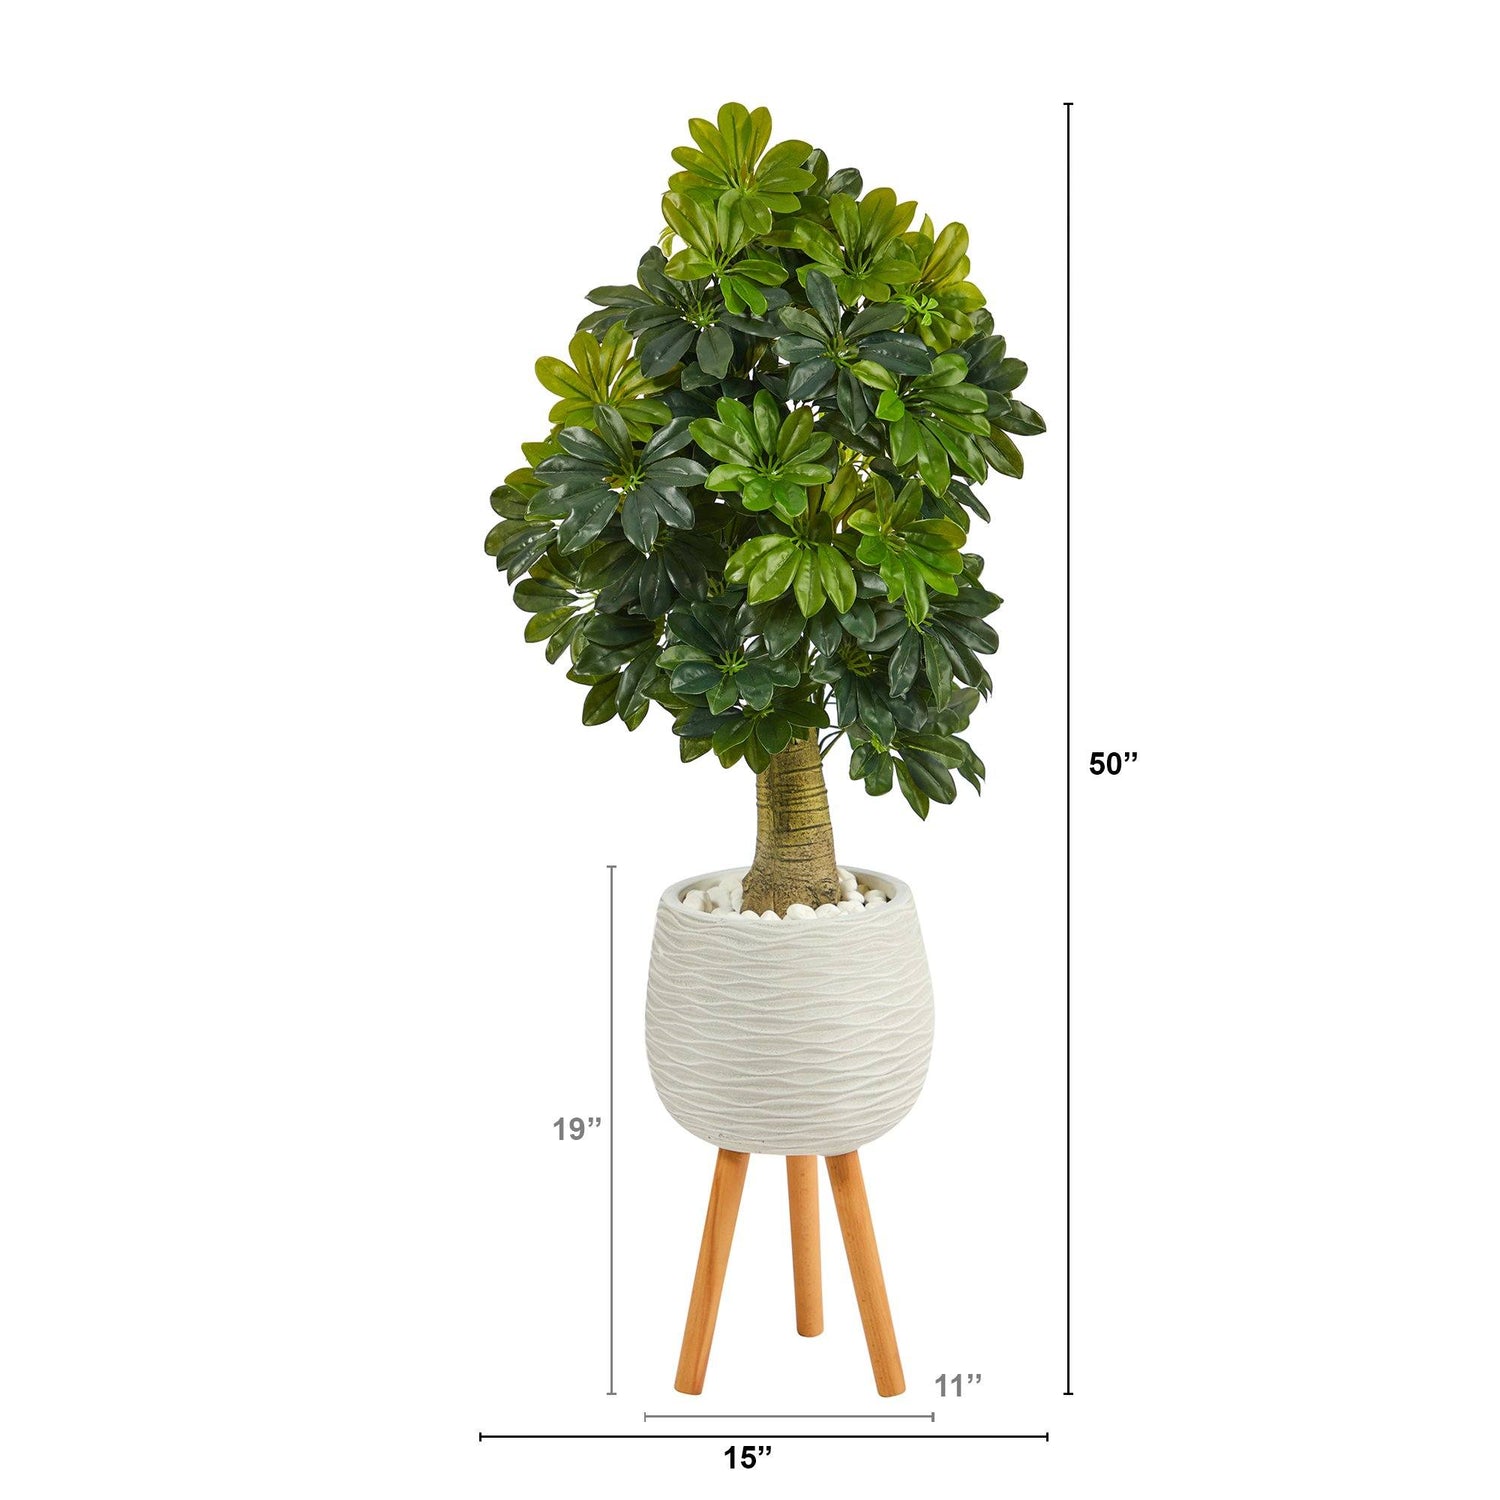 50” Schefflera Artificial Tree in White Planter with Stand (Real Touch)